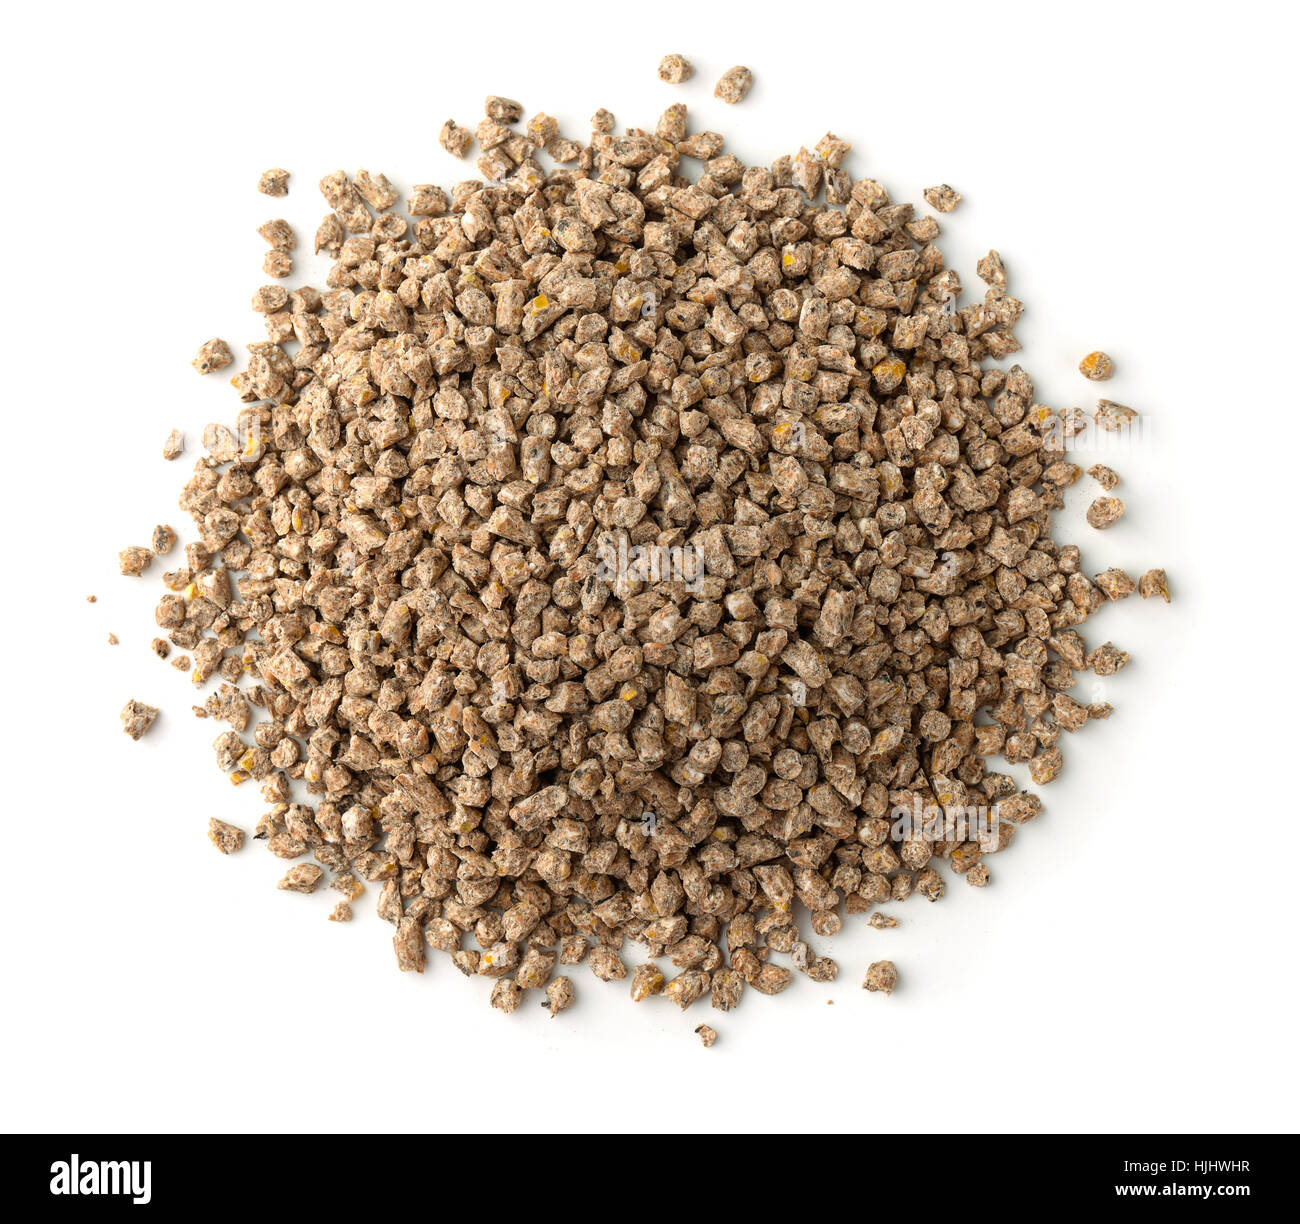 Top view of compound feed pellets isolated on white Stock Photo